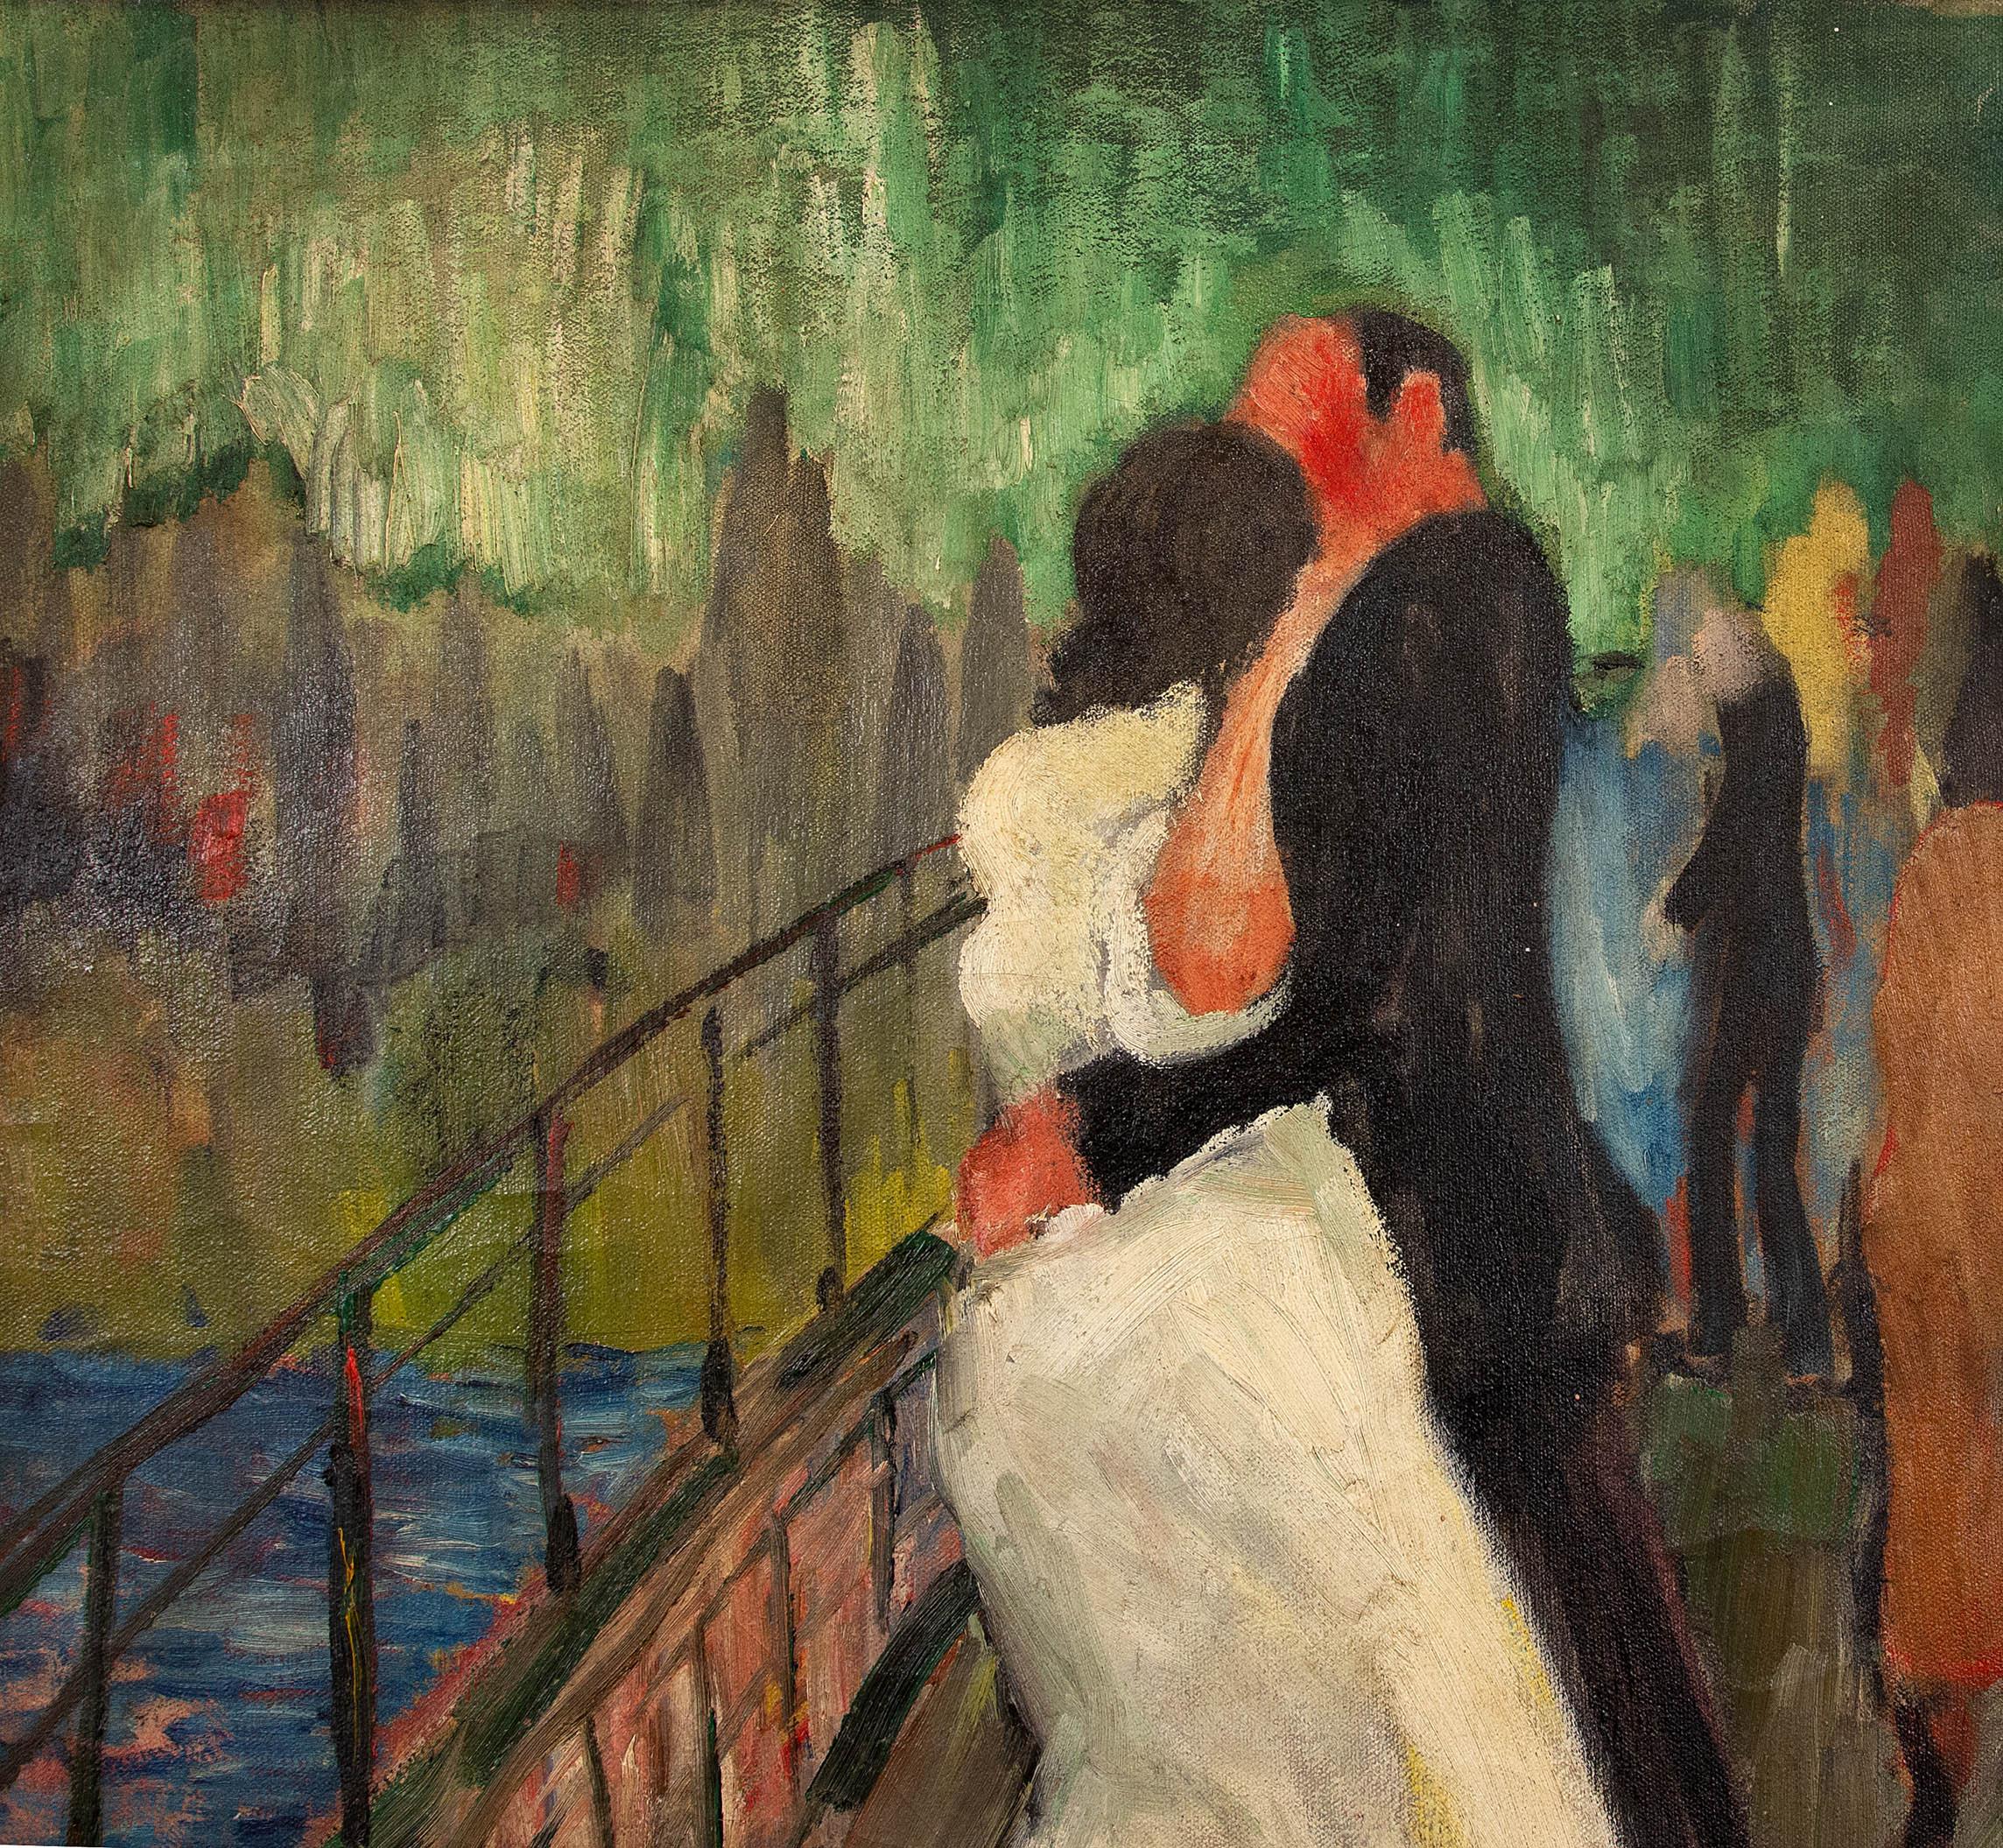 A romantic couple dancing out on the terrace with the metropolis in the distance. An early painting by Thomas Eldred. Oil on canvas, circa 1930s. Signed 